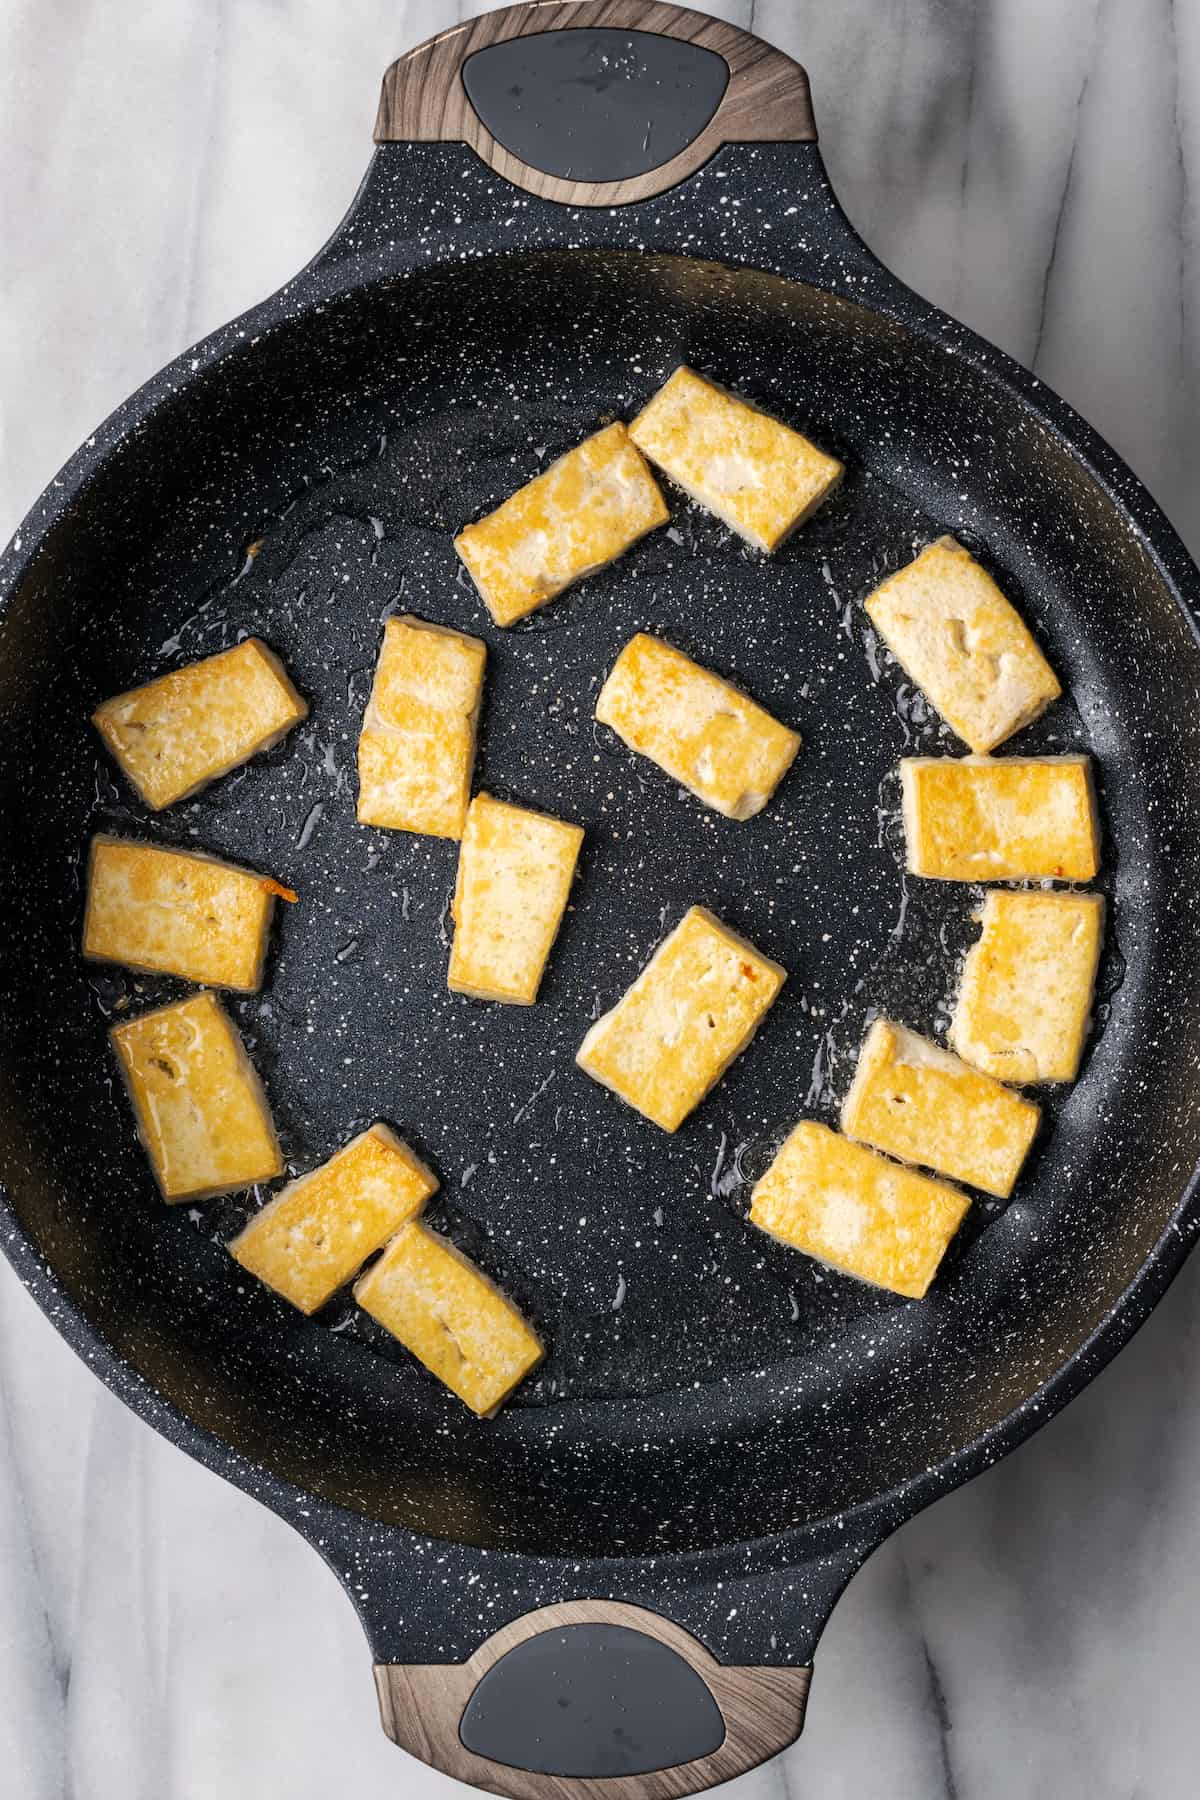 Overhead view of tofu pieces cooking in pan